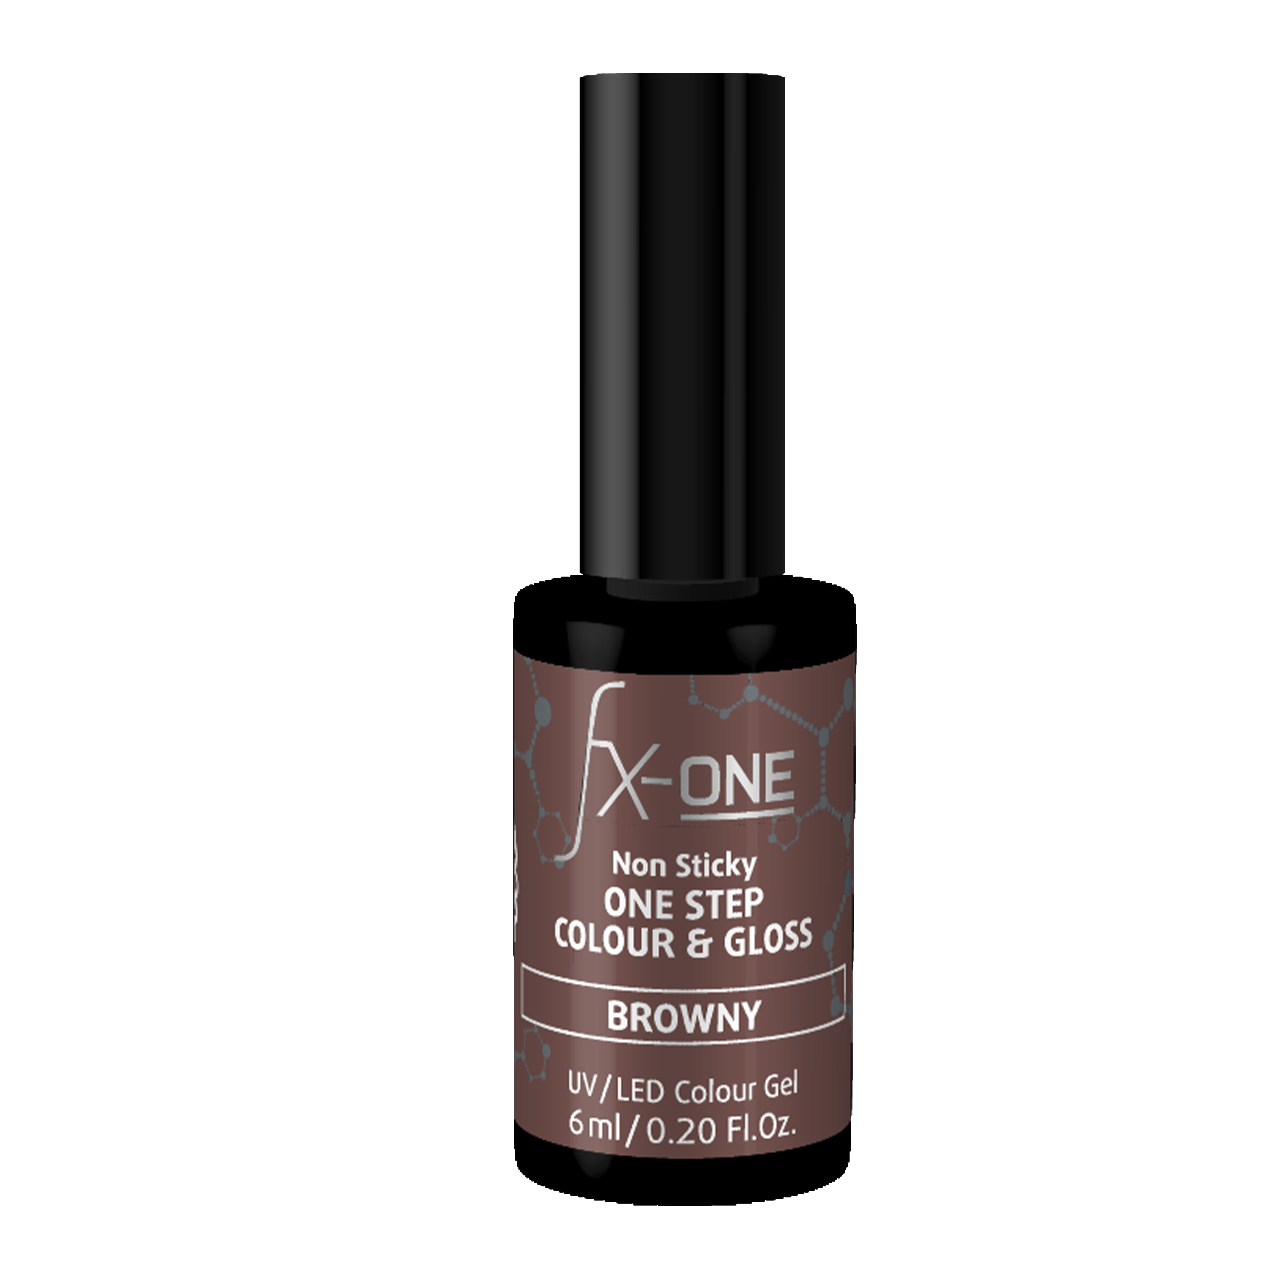 FX-ONE Colour & Gloss Browny 6ml